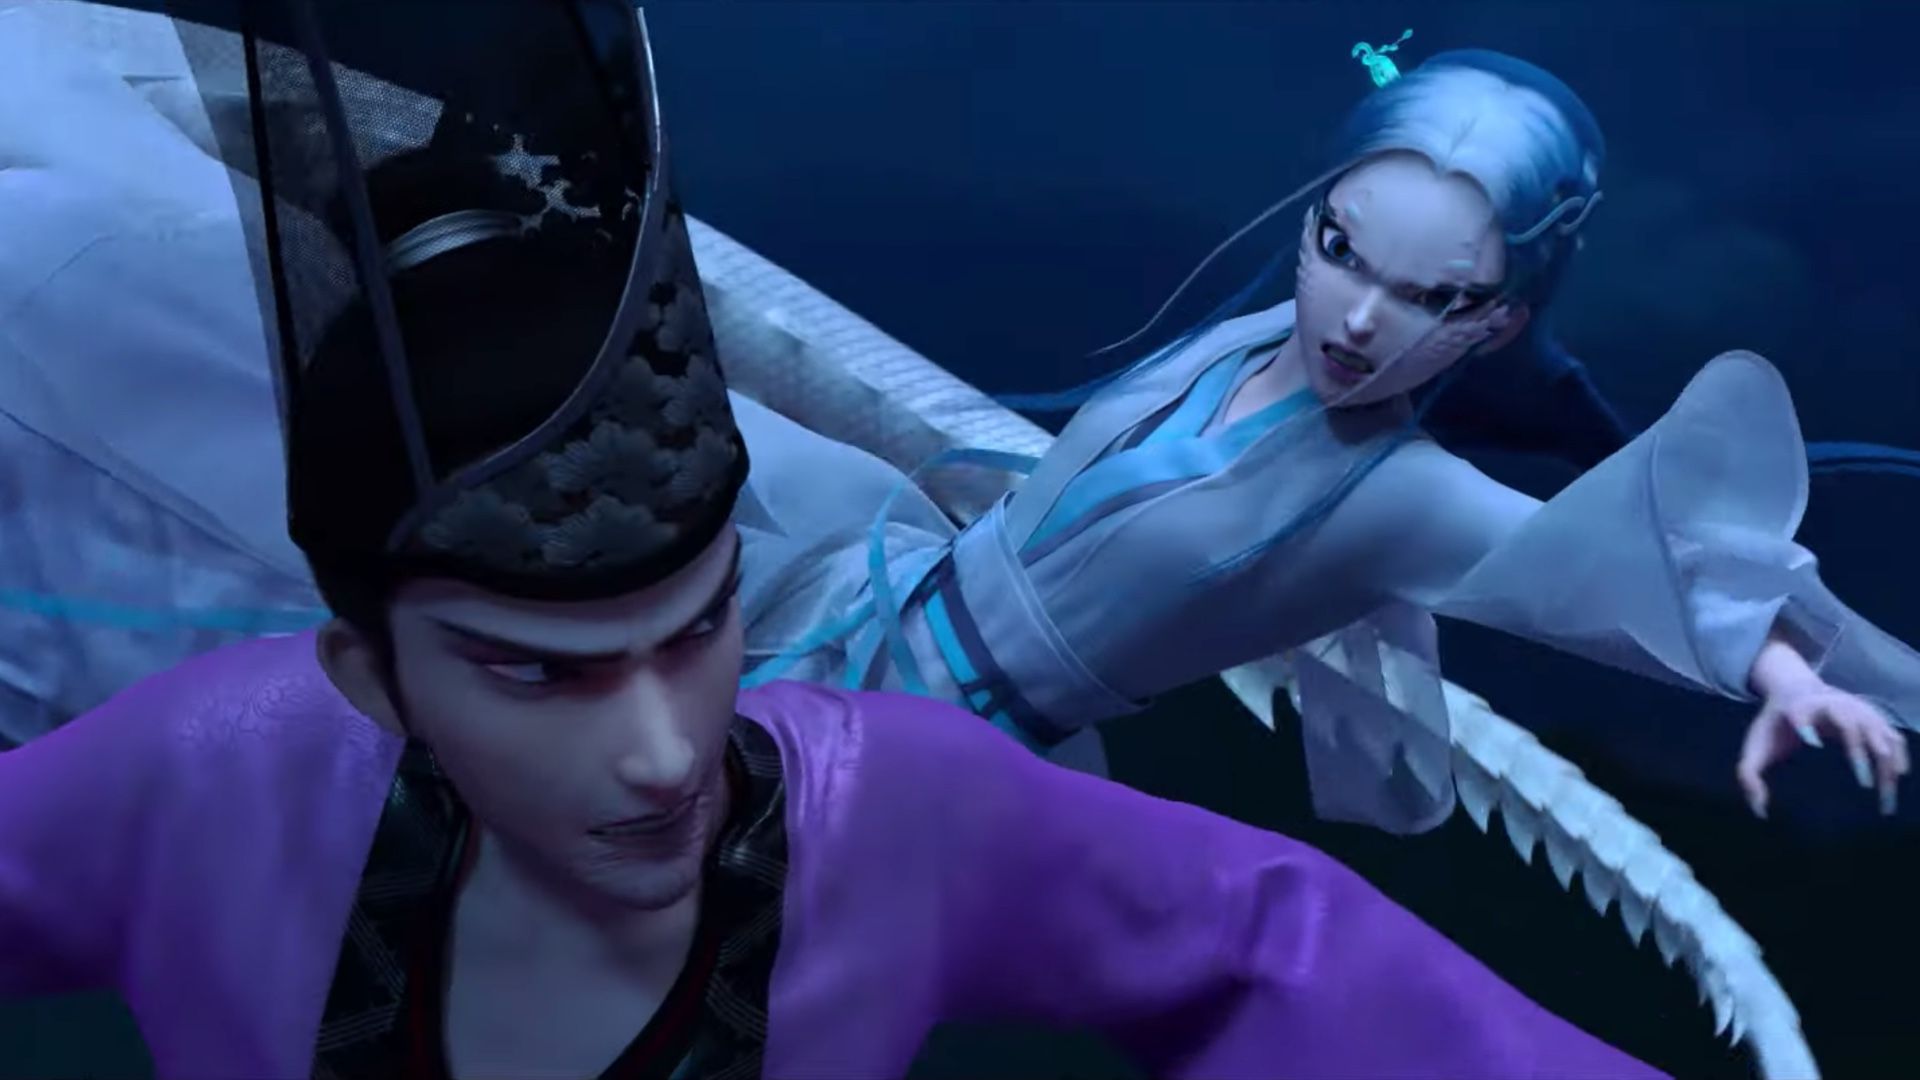 Magical And Adventure Filled New For The Chinese Animated Fantasy Film WHITE SNAKE